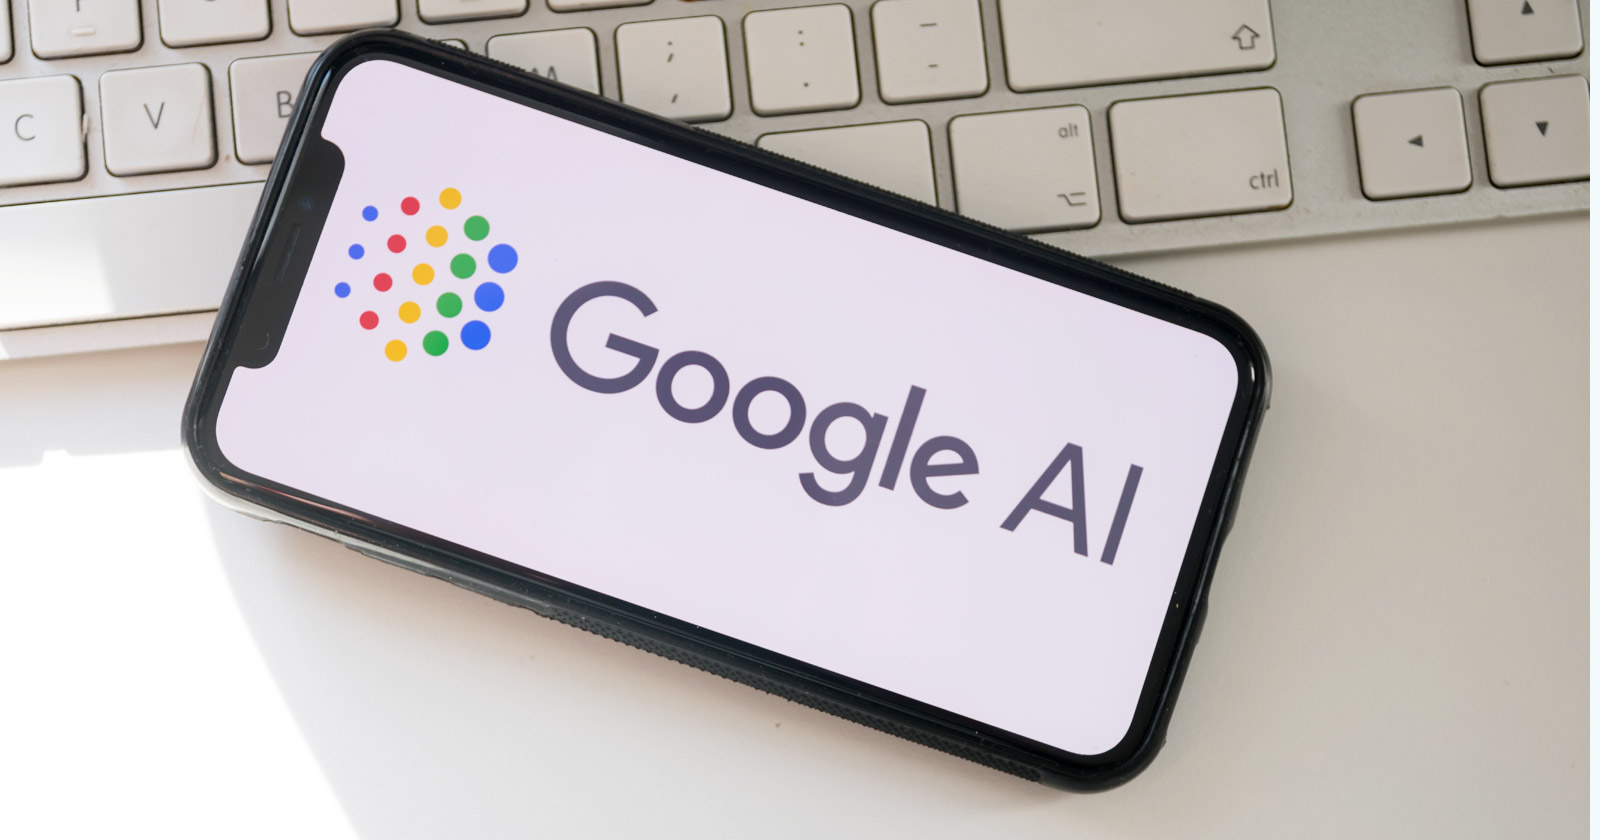 Google Research: Is This Dataset Used For Google's AI Search?